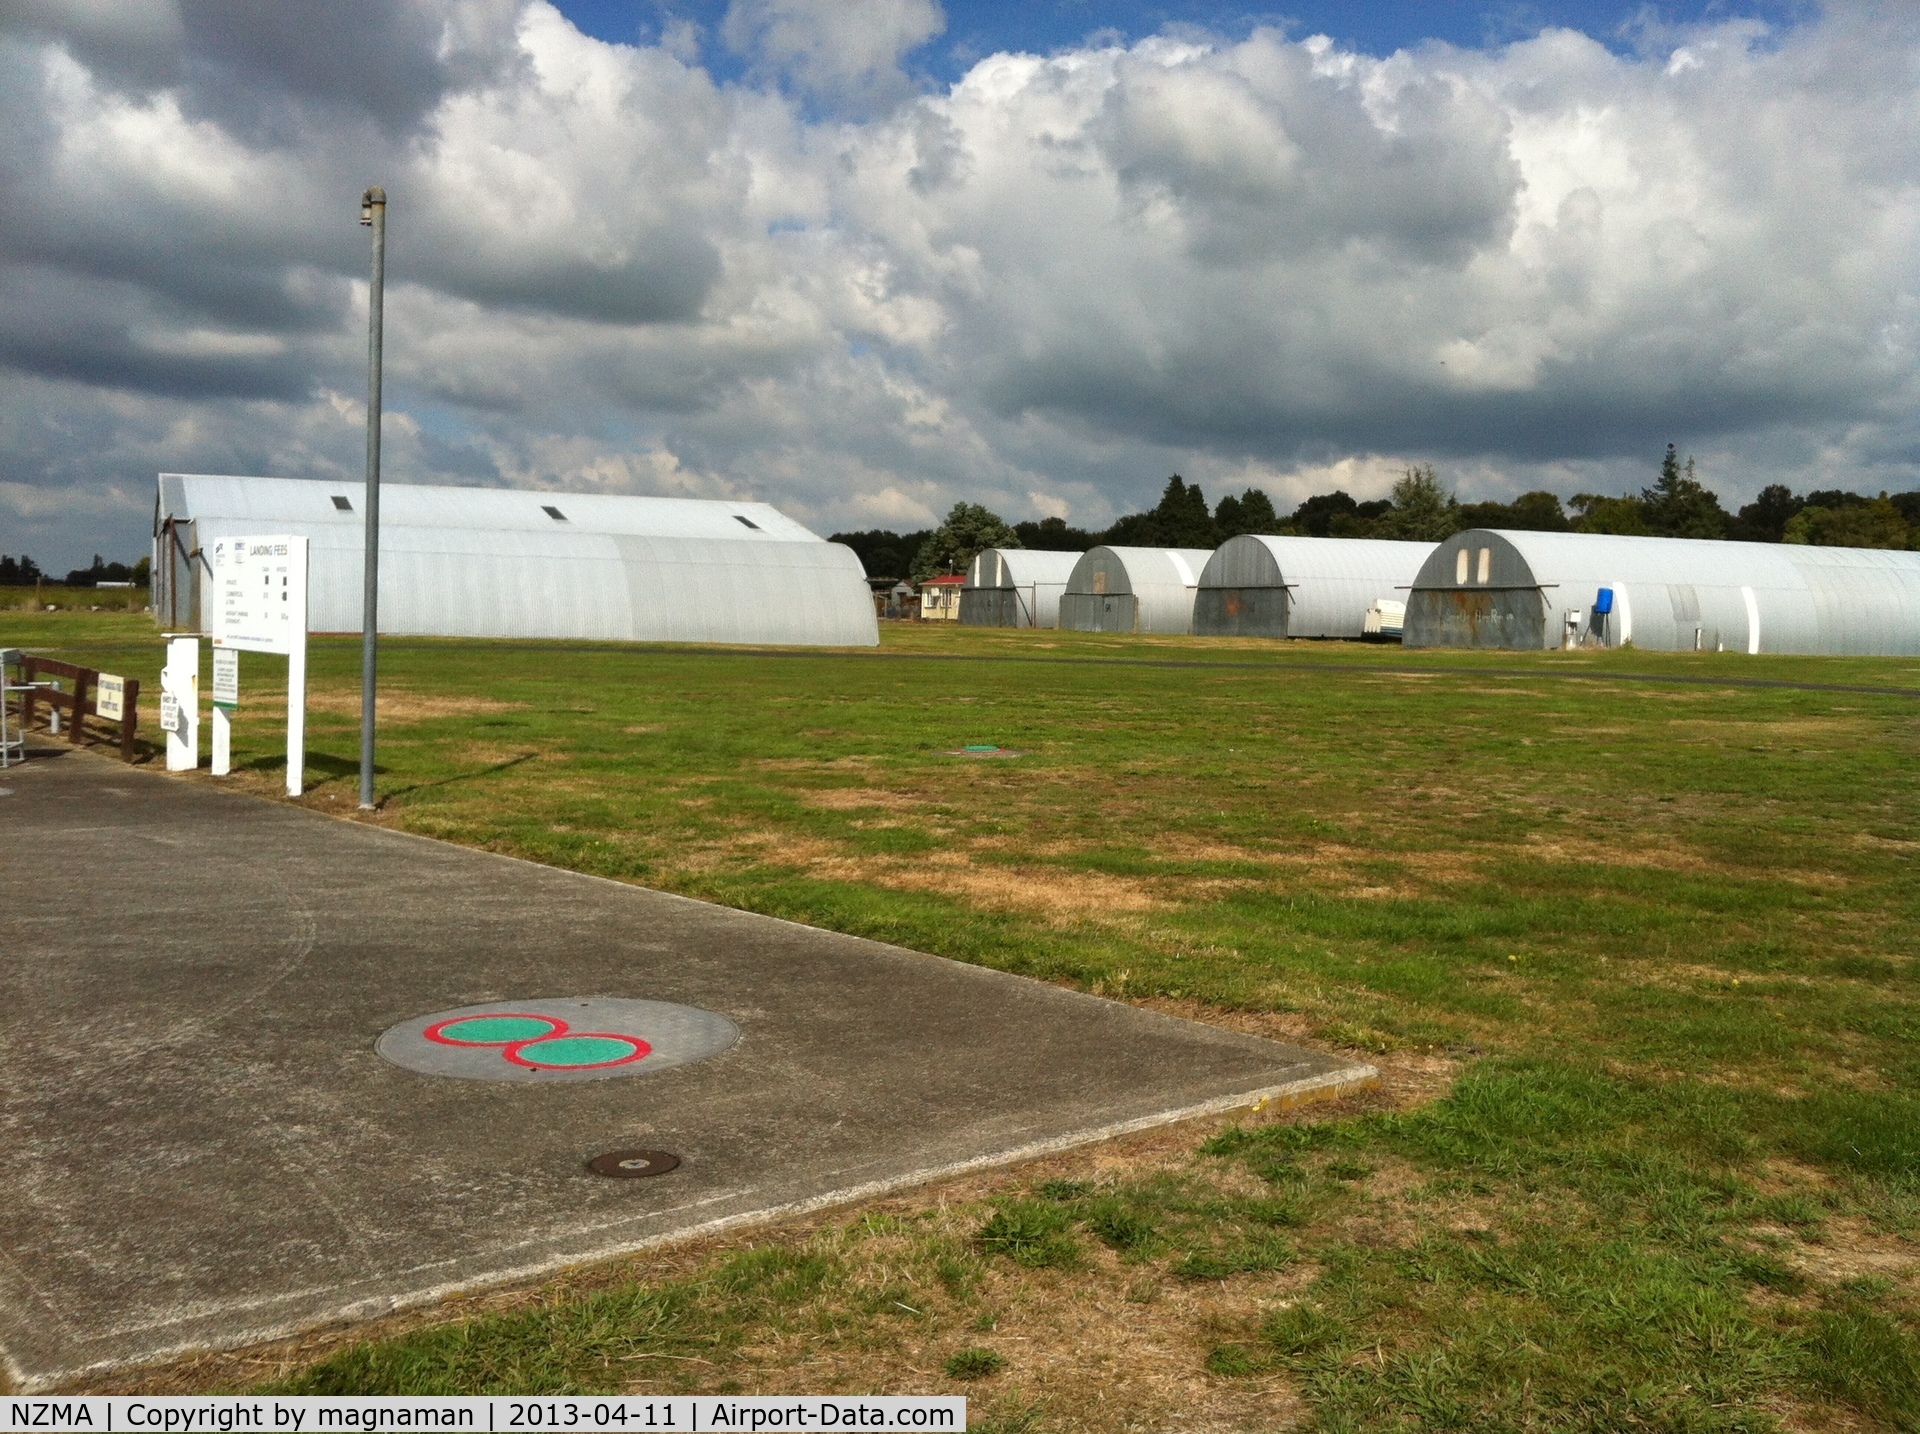 Matamata Aerodrome Airport, Matamata New Zealand (NZMA) - Nothing moving here today - luckily three aircraft were on the grass otherwise would have been a long drive for nothing. Looks like an old army camp base.